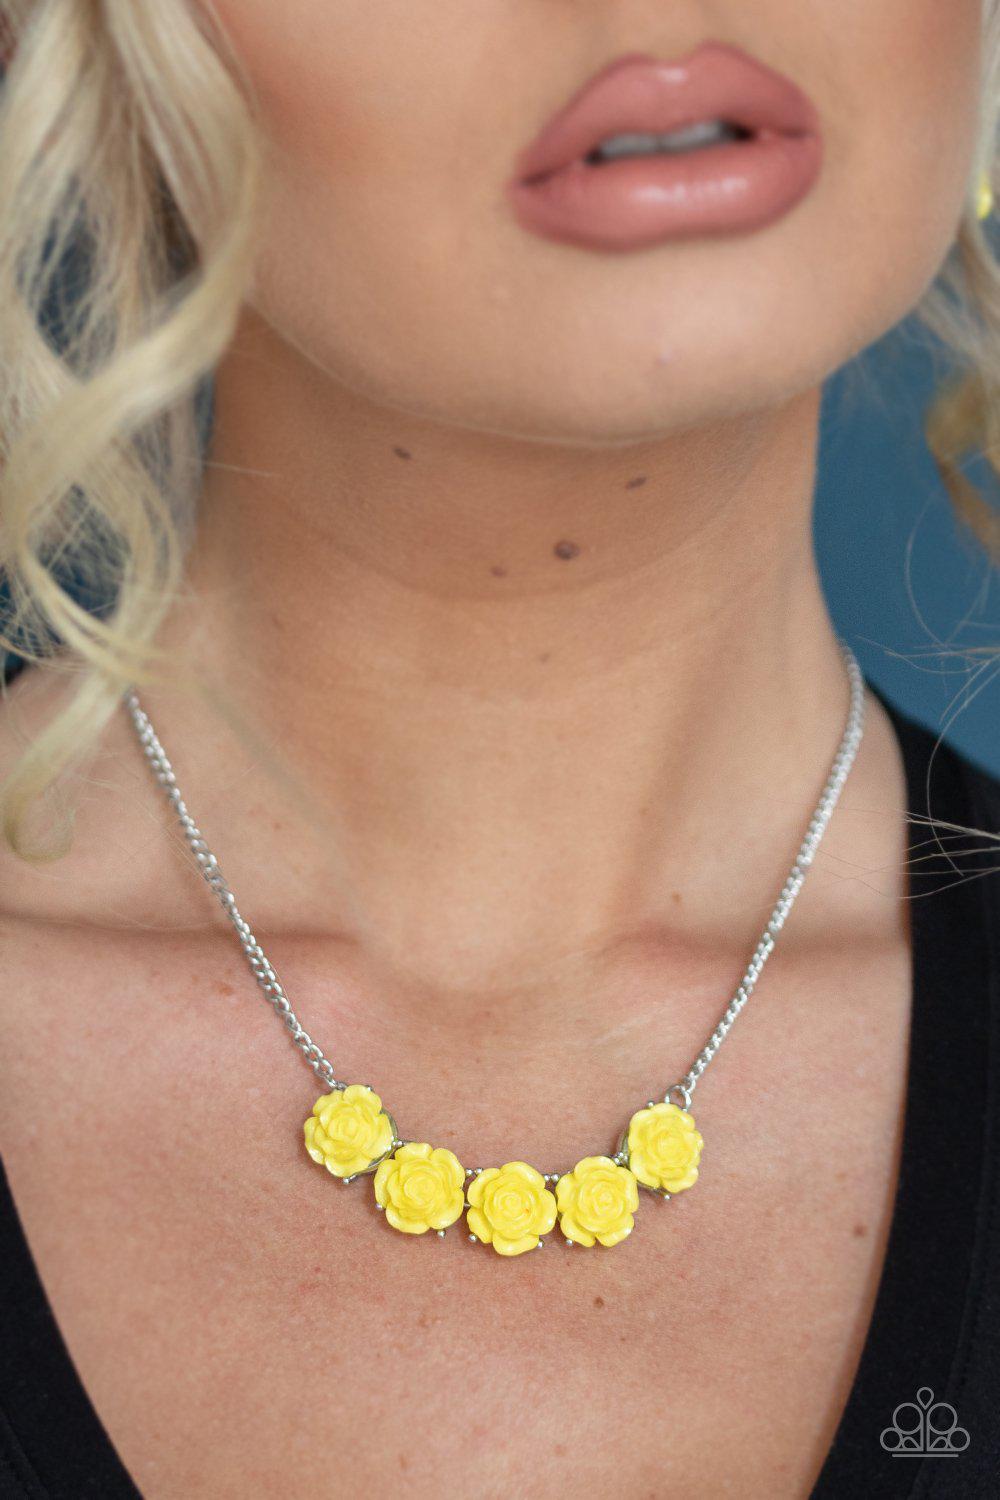 Garden Party Posh Yellow Rose Flower Necklace - Paparazzi Accessories - model -CarasShop.com - $5 Jewelry by Cara Jewels